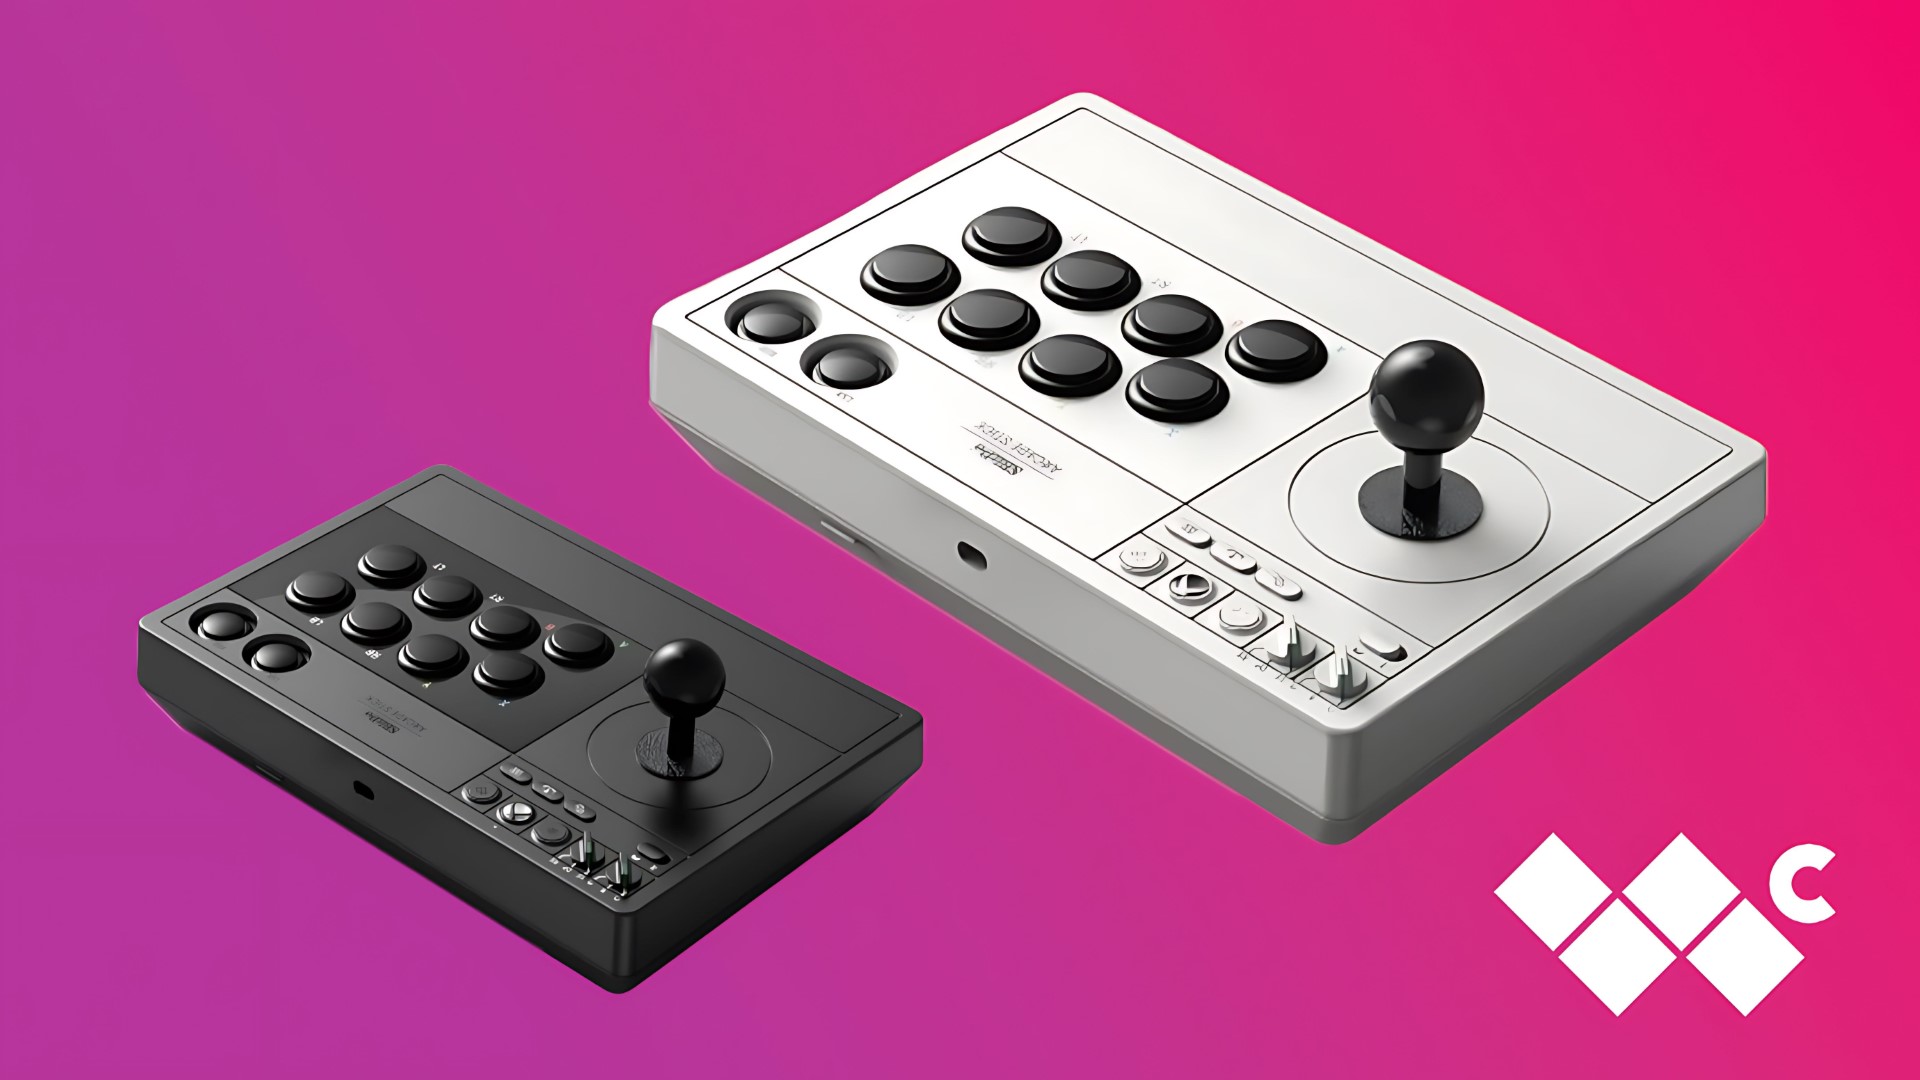 8BitDo announces its first Xbox-style controller - The Verge